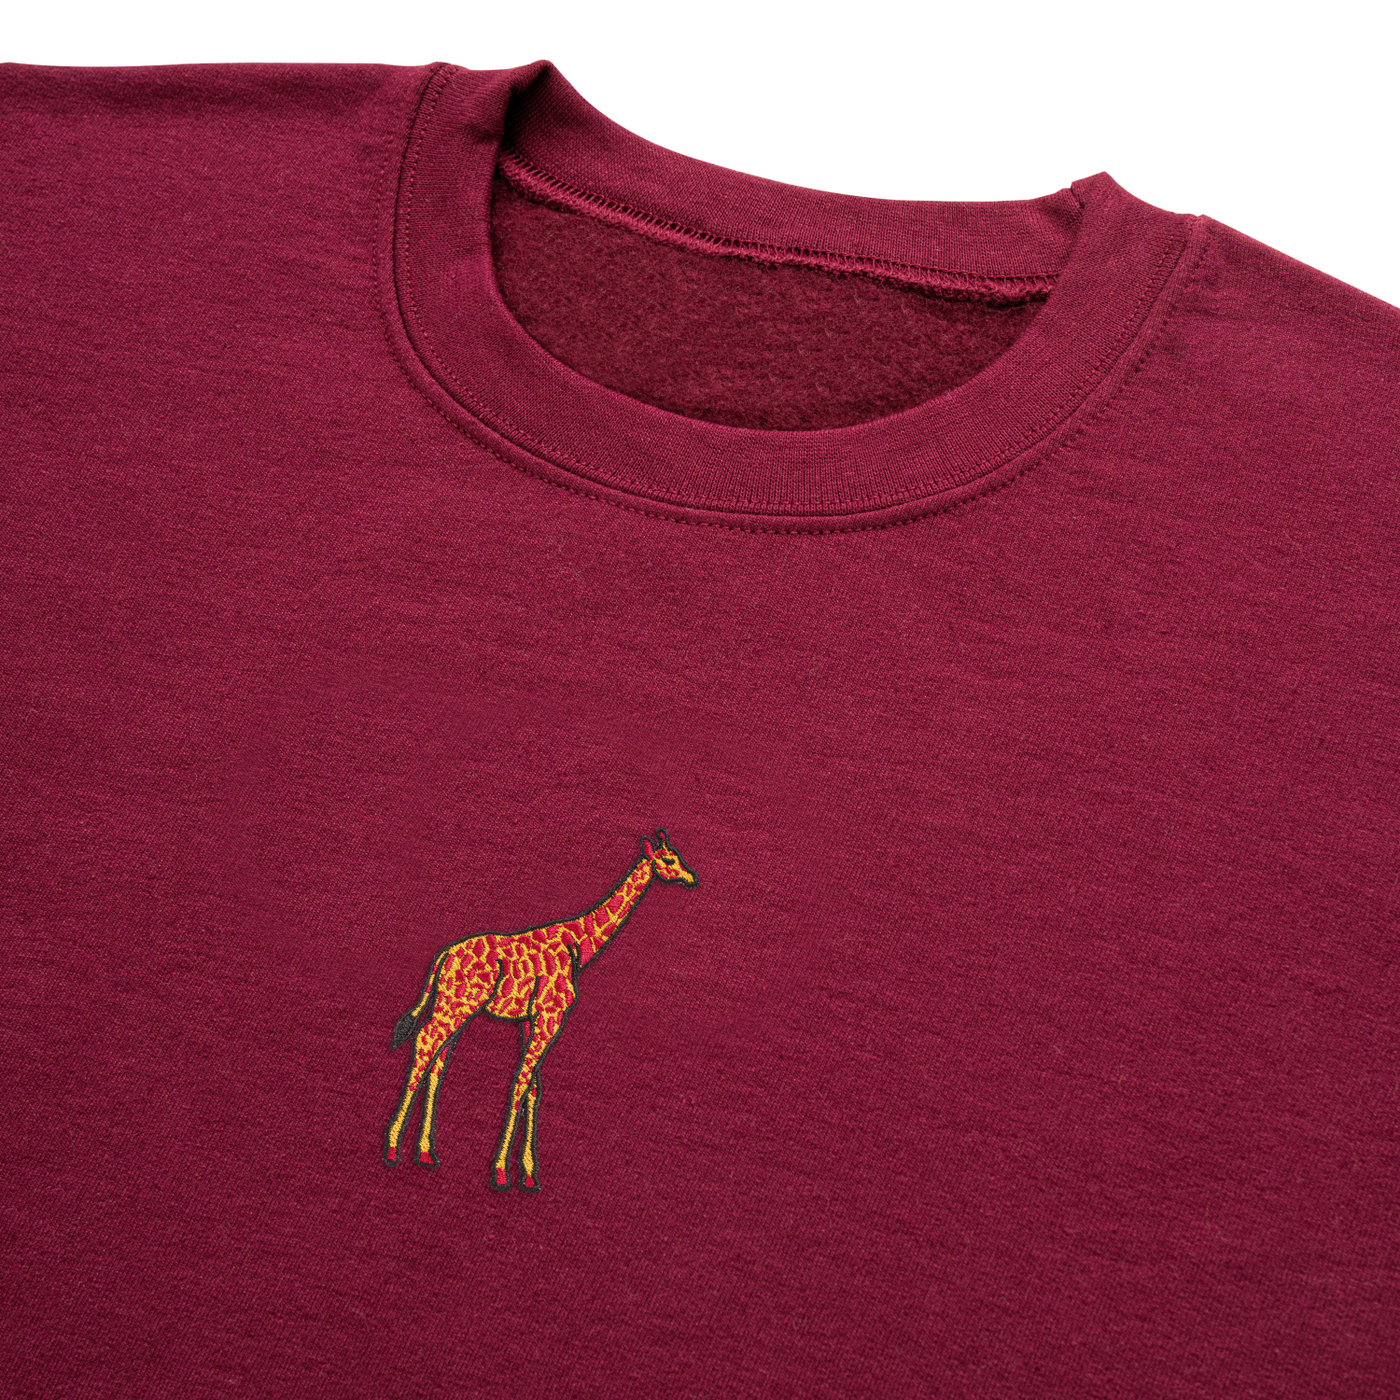 Bobby's Planet Women's Embroidered Giraffe Sweatshirt from African Animals Collection in Maroon Color#color_maroon